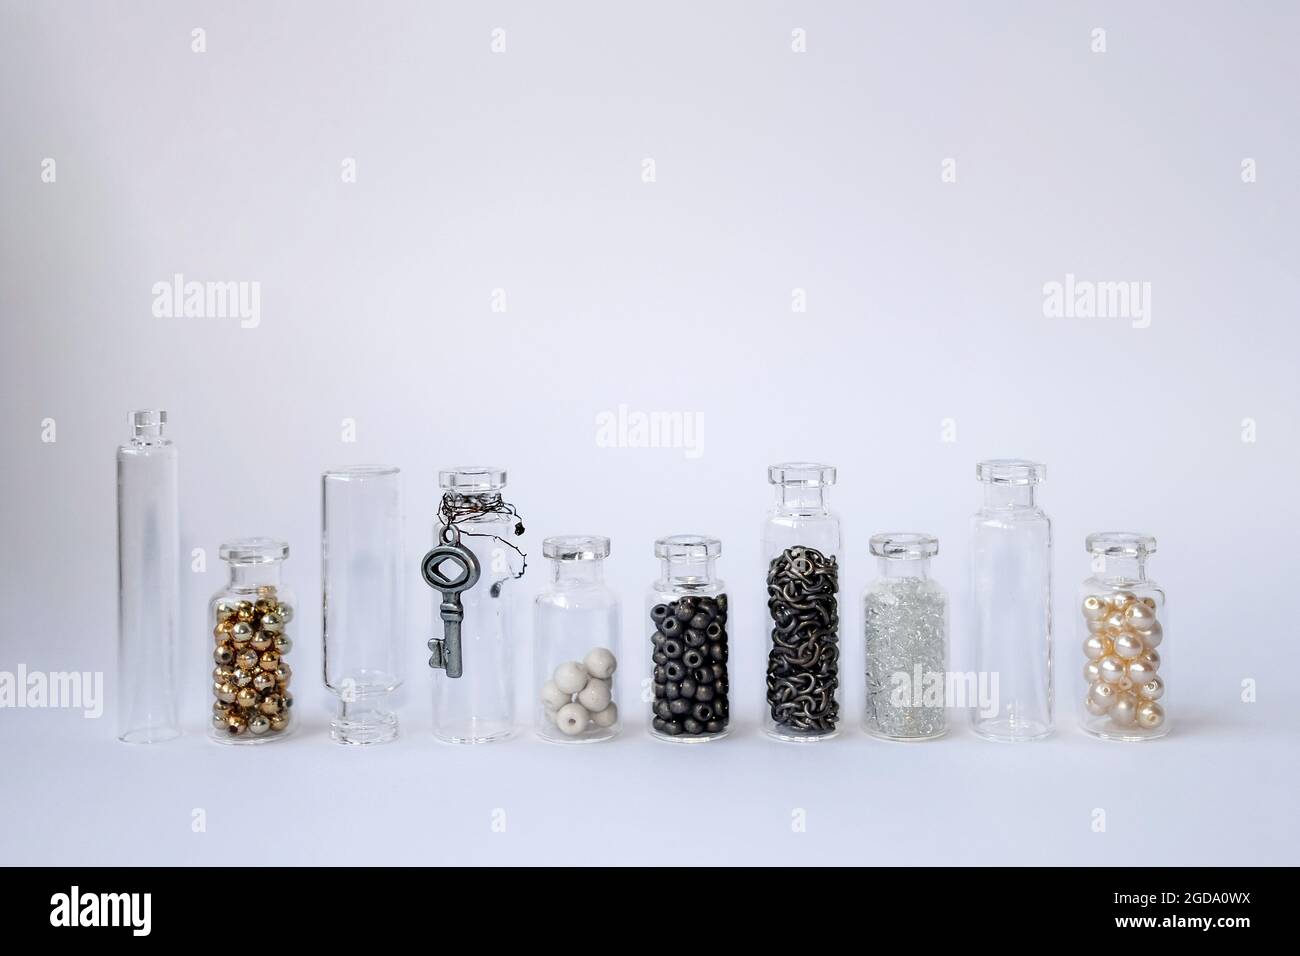 https://c8.alamy.com/comp/2GDA0WX/small-glass-jars-stand-side-by-side-in-one-line-transparent-containers-filled-with-beads-2GDA0WX.jpg